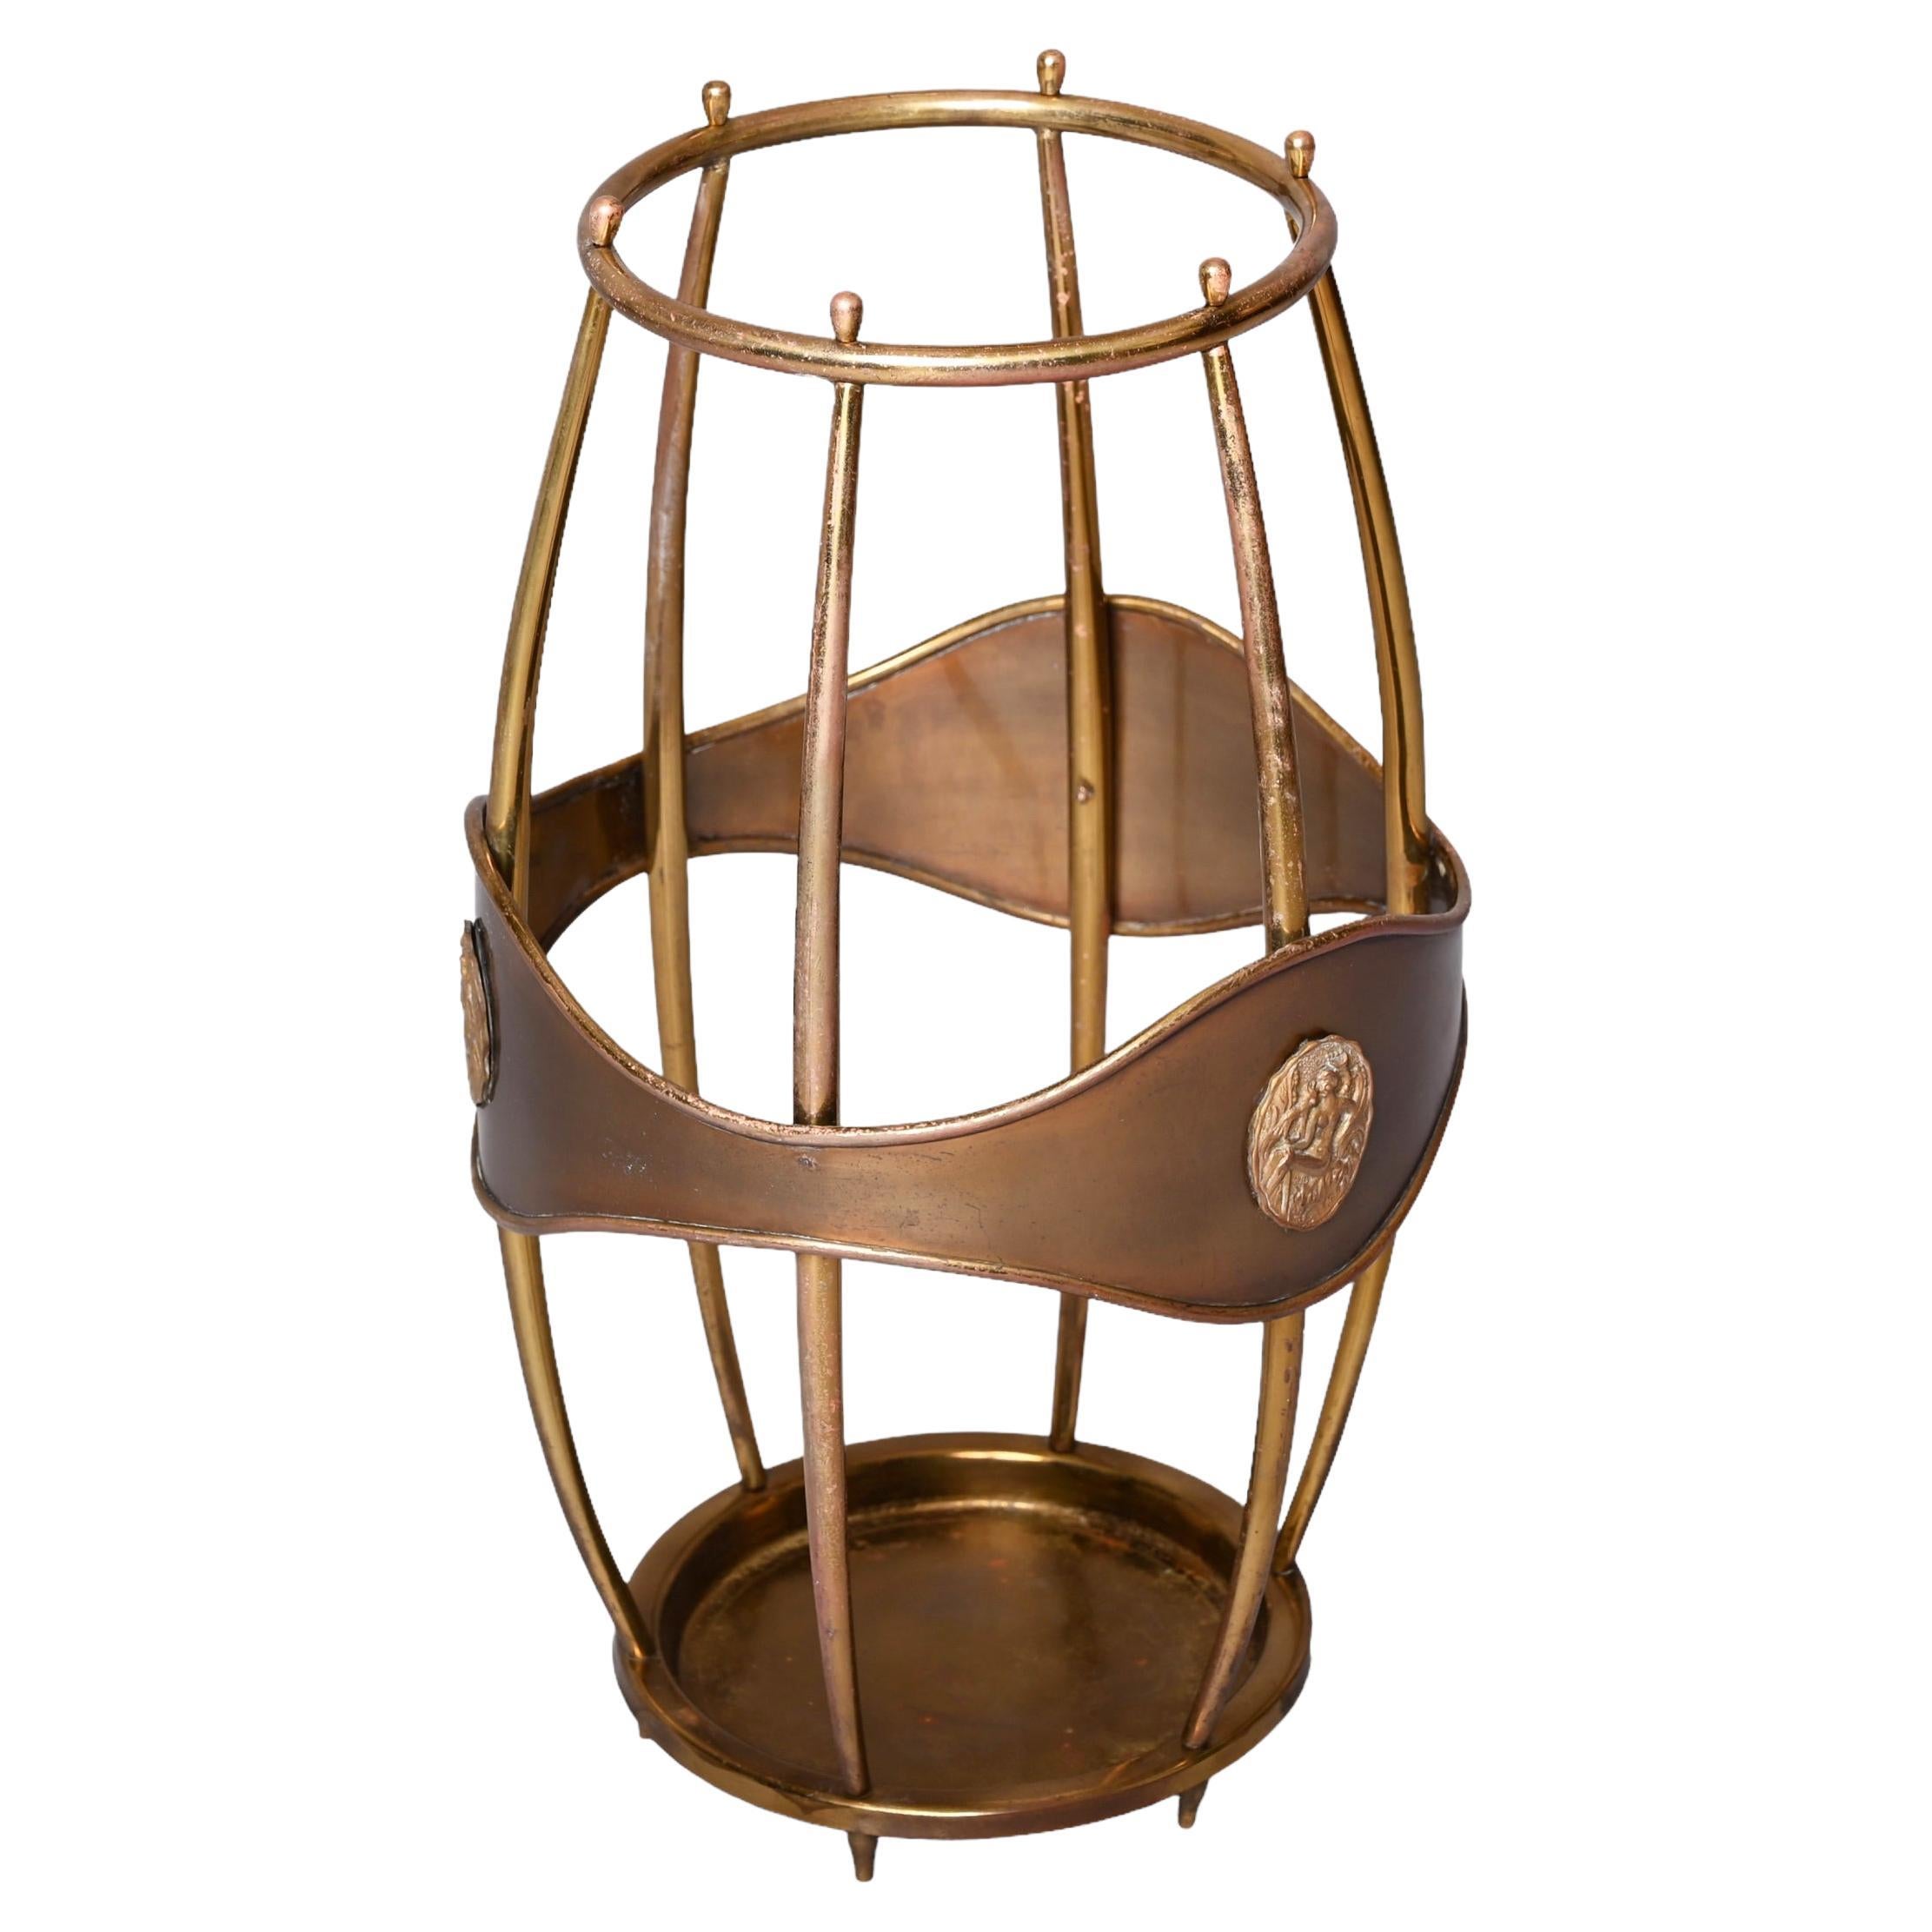 Midcentury Italian Brass Barrell-Shaped Umbrella Stand and Cane Holder, 1950s For Sale